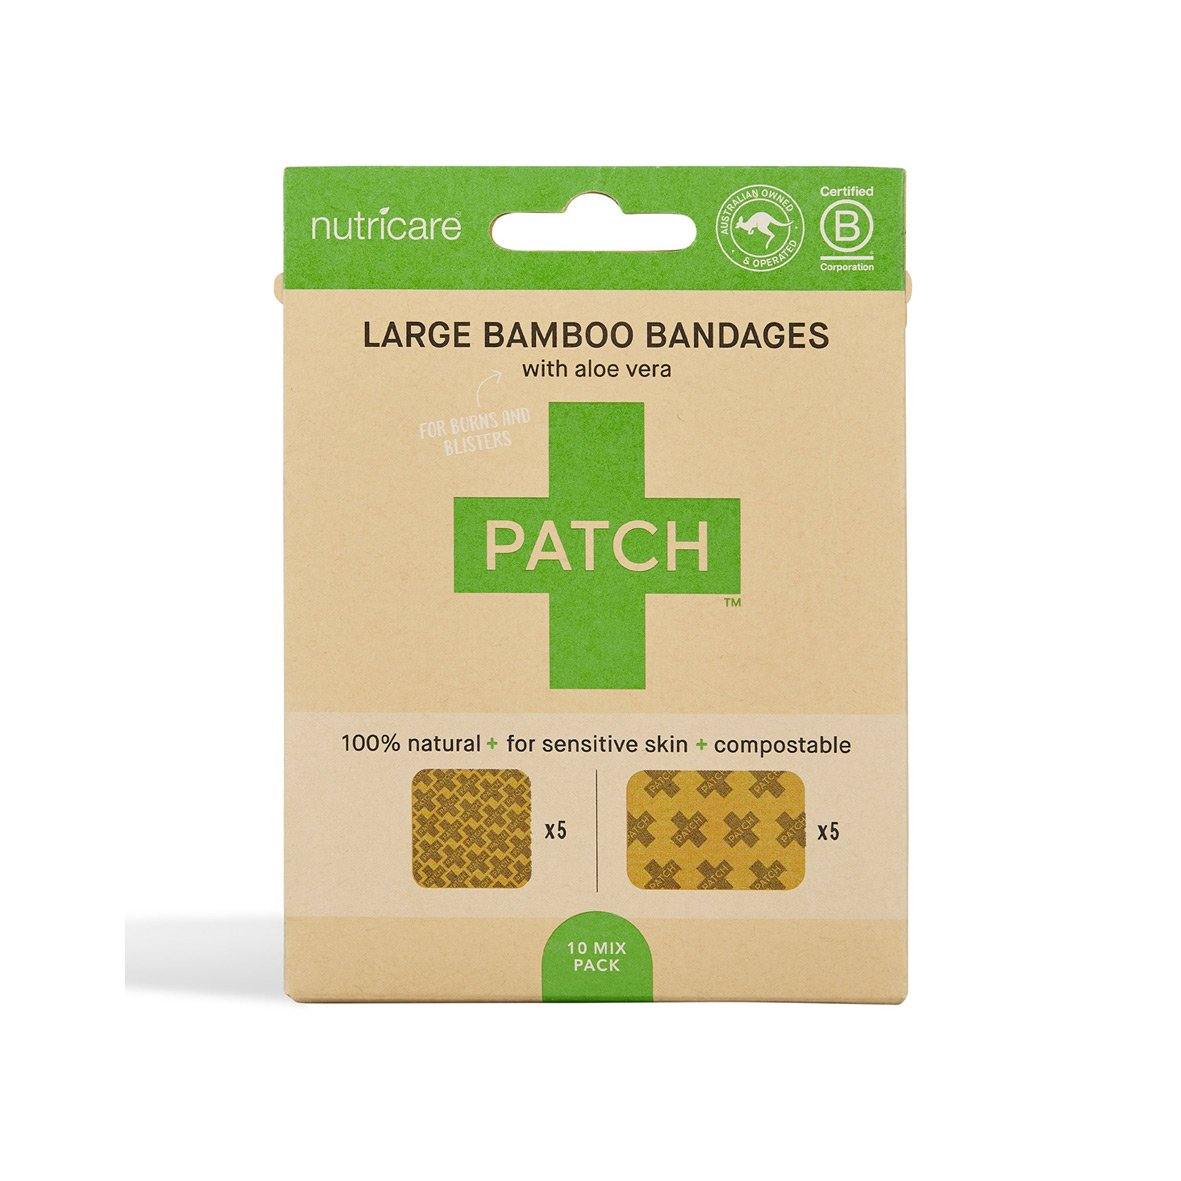 PATCH Large Bandage Aloe Vera Packaging Front